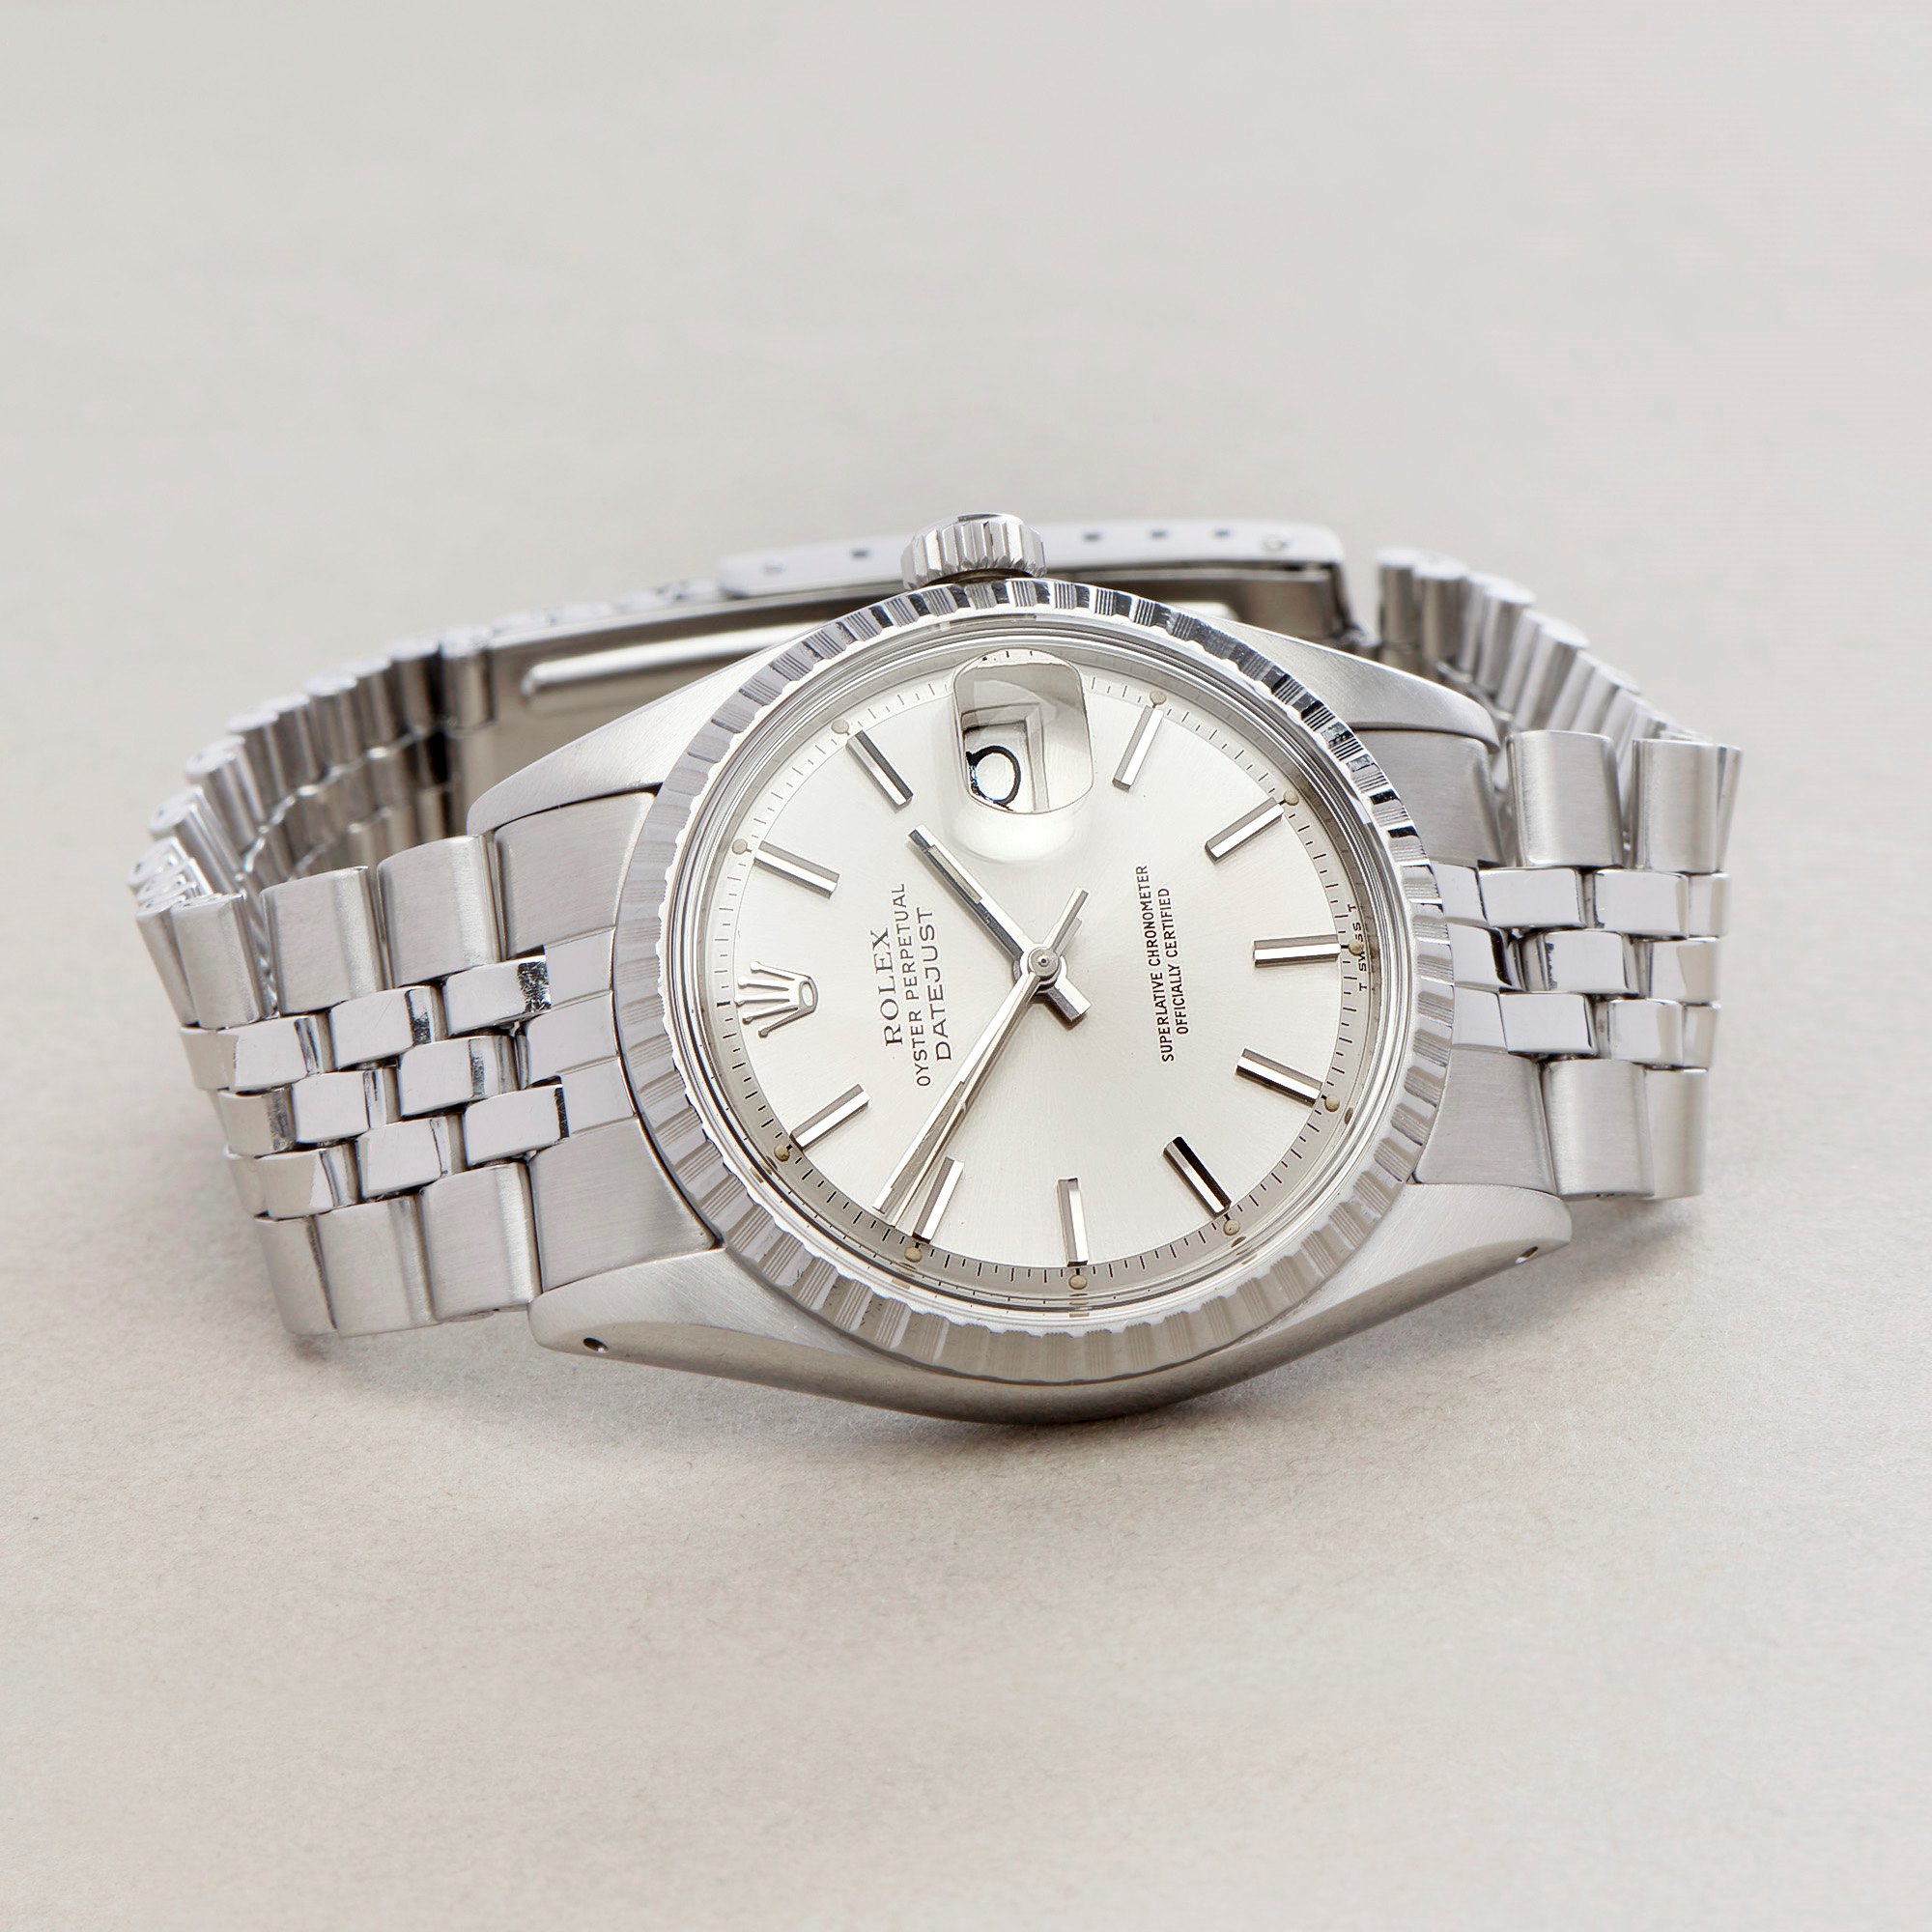 Rolex Datejust 36 Stainless Steel Watch 1603 - Image 9 of 10